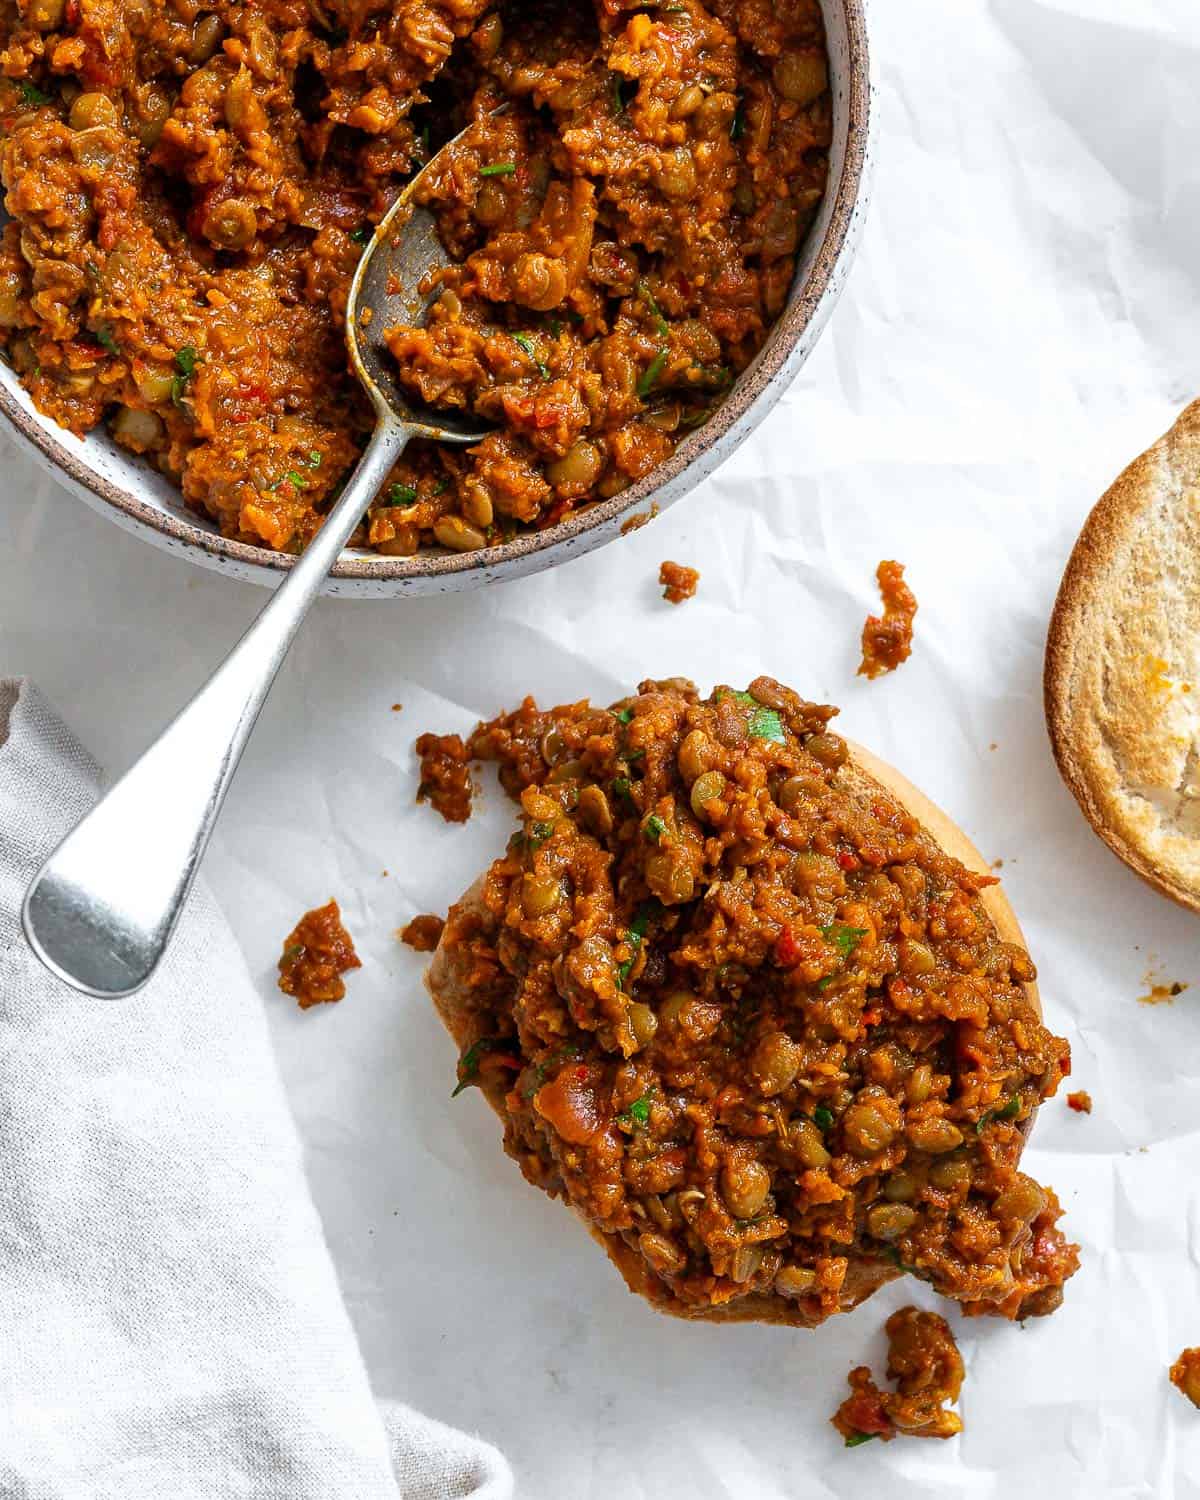 completed Lentil Sloppy Joes (Stove or Slow Cooker) in a bowl and on a bun on a white surface